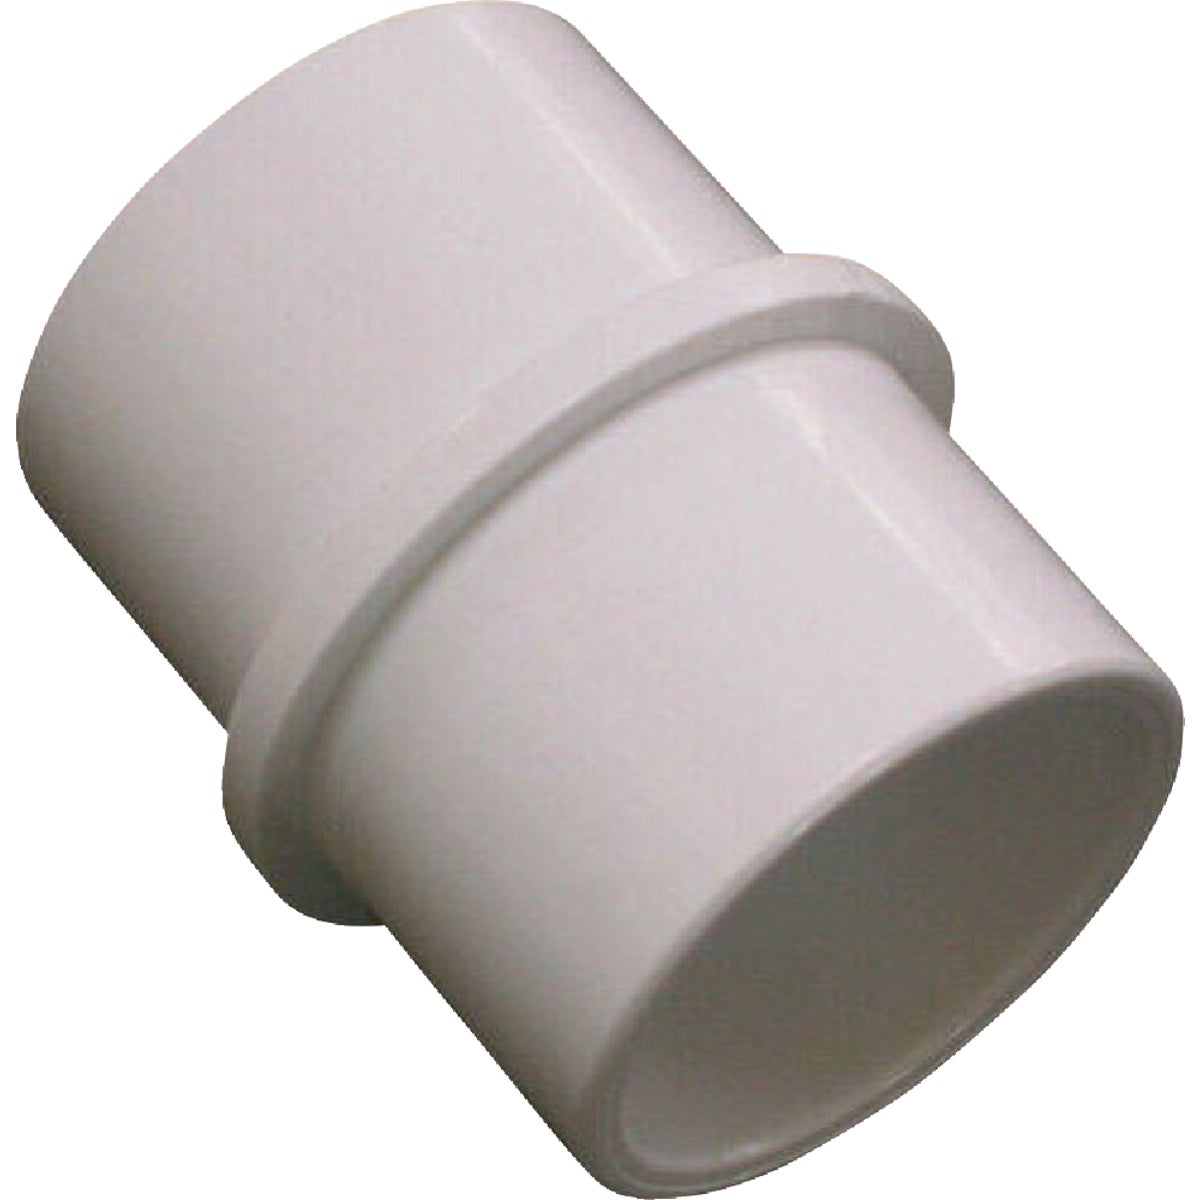 Campbell Magic Mend 4 In. Slip Schedule 40 Inside Flush Connection PVC Coupling